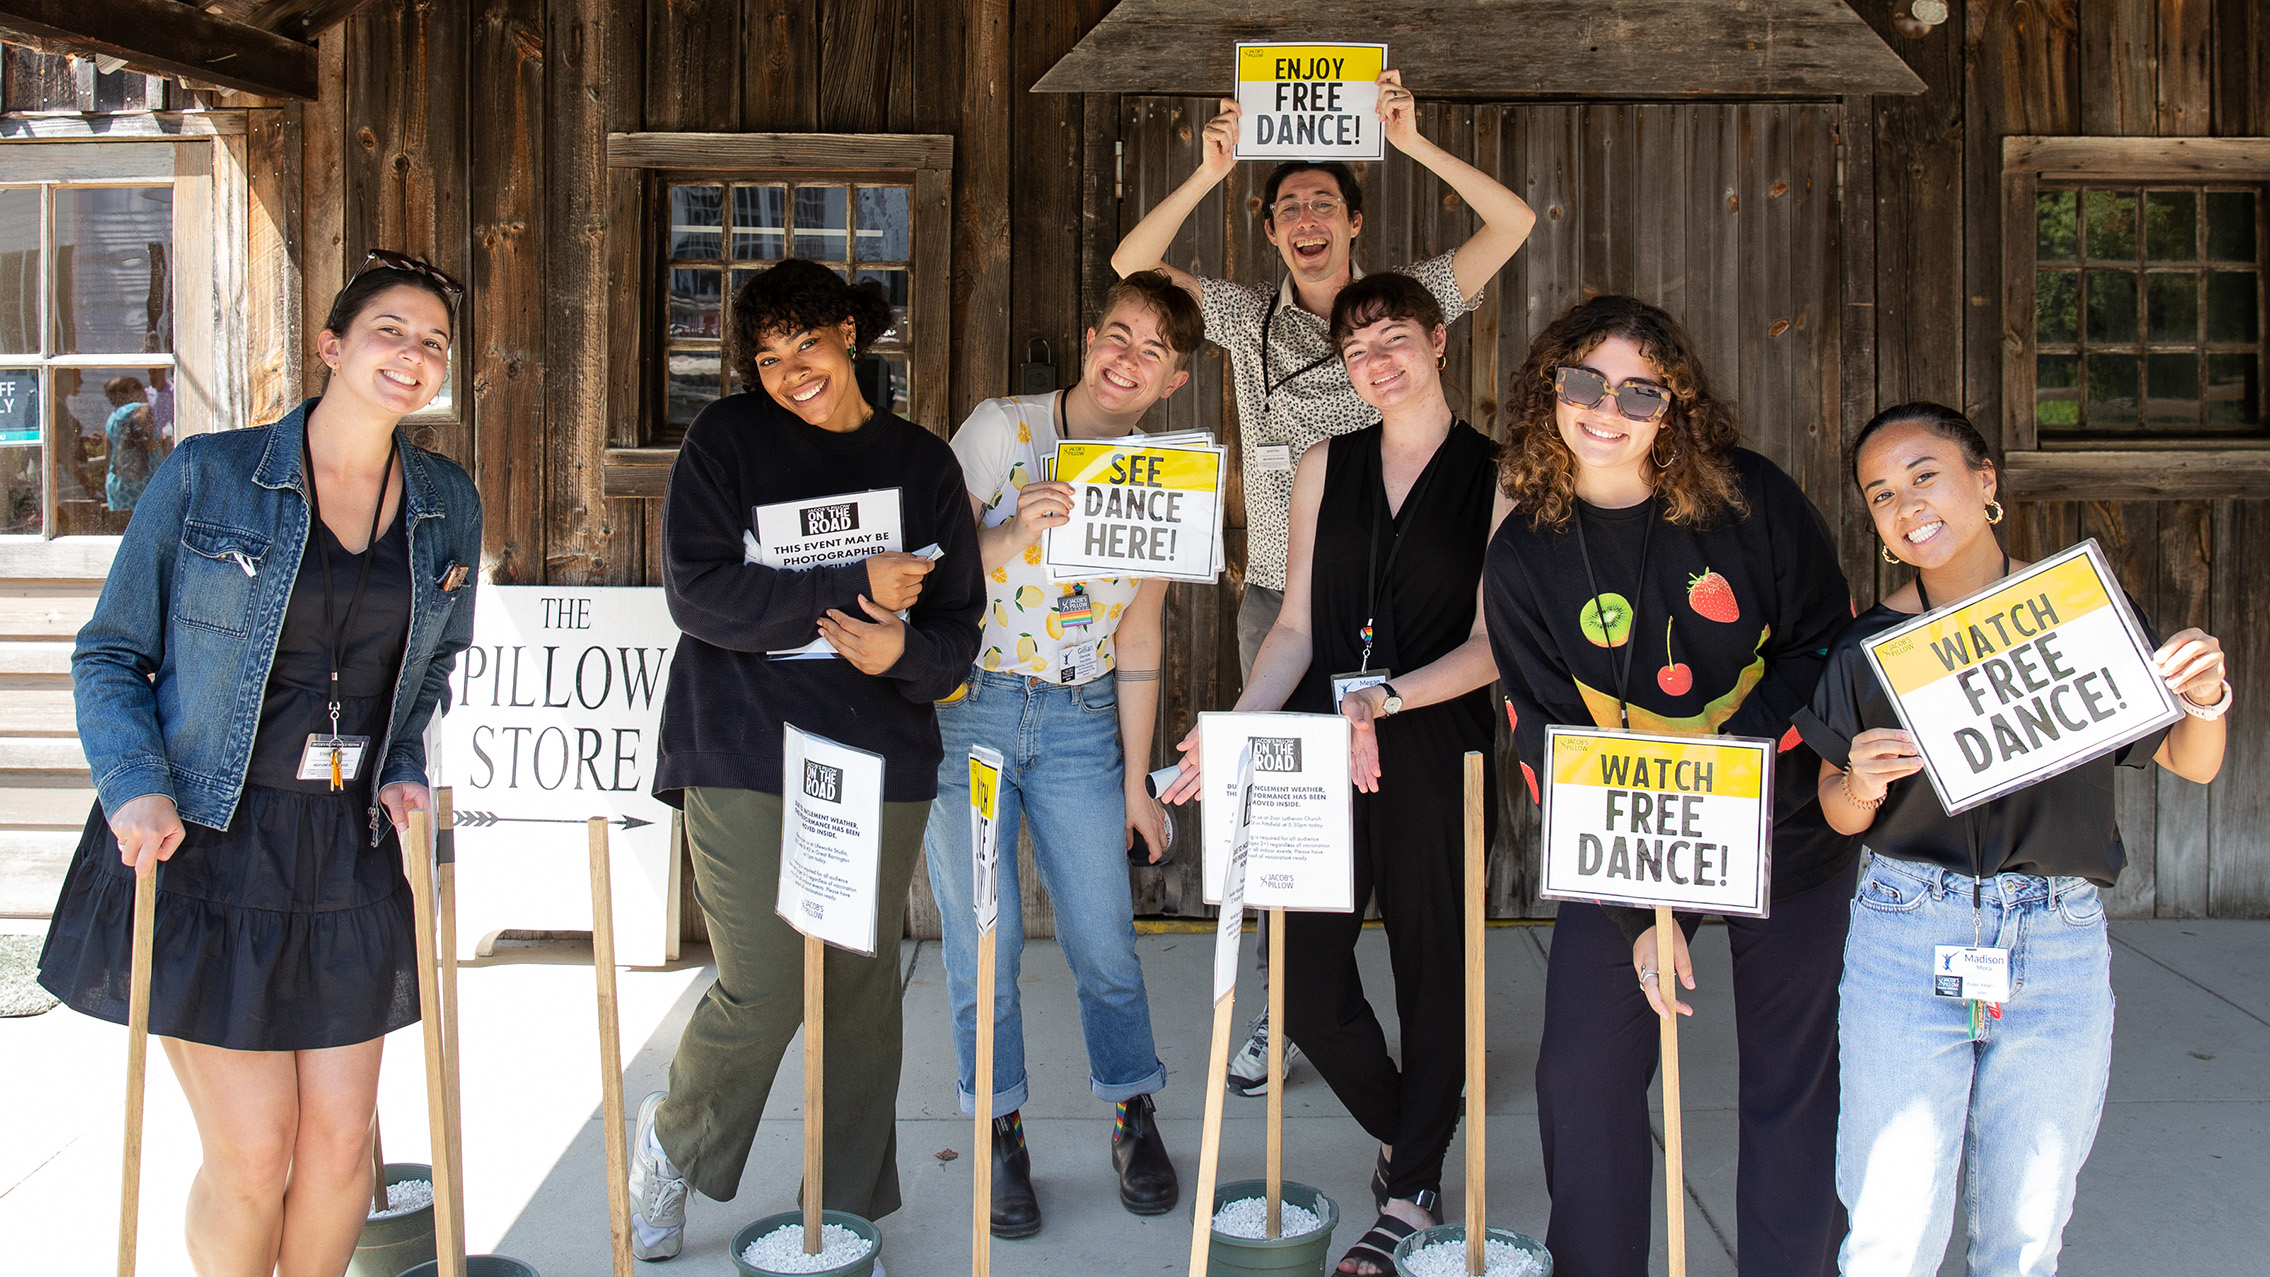 A group of people hold signs that say "Watch FREE Dance", "Enjoy FREE Dance", and "See Dance Here" designed in black and yellow. They are all standing in front of a wood building.